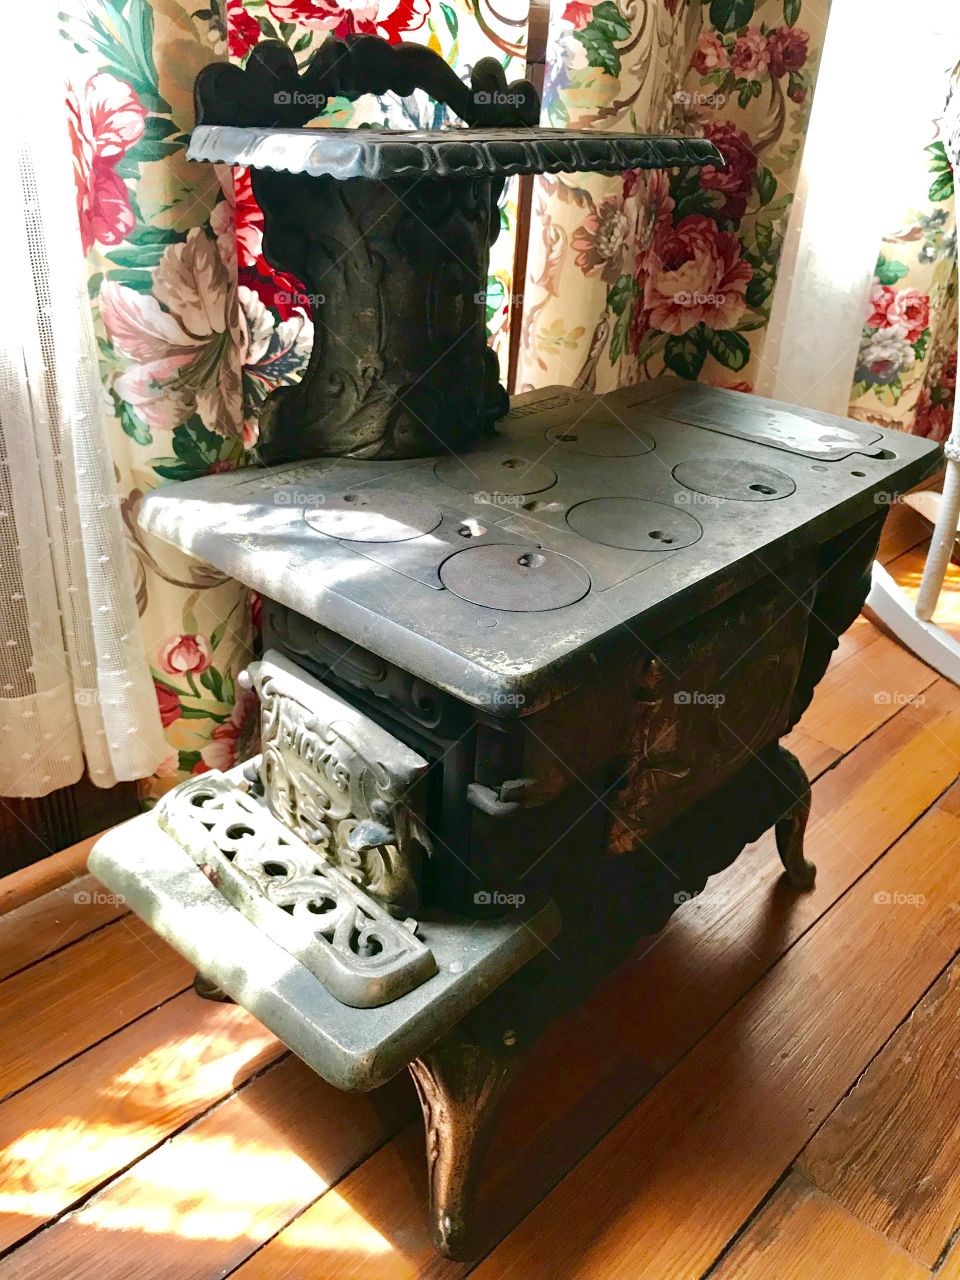 The original easy bake oven. Found in the 1897 Poe House in Fayetteville, NC.